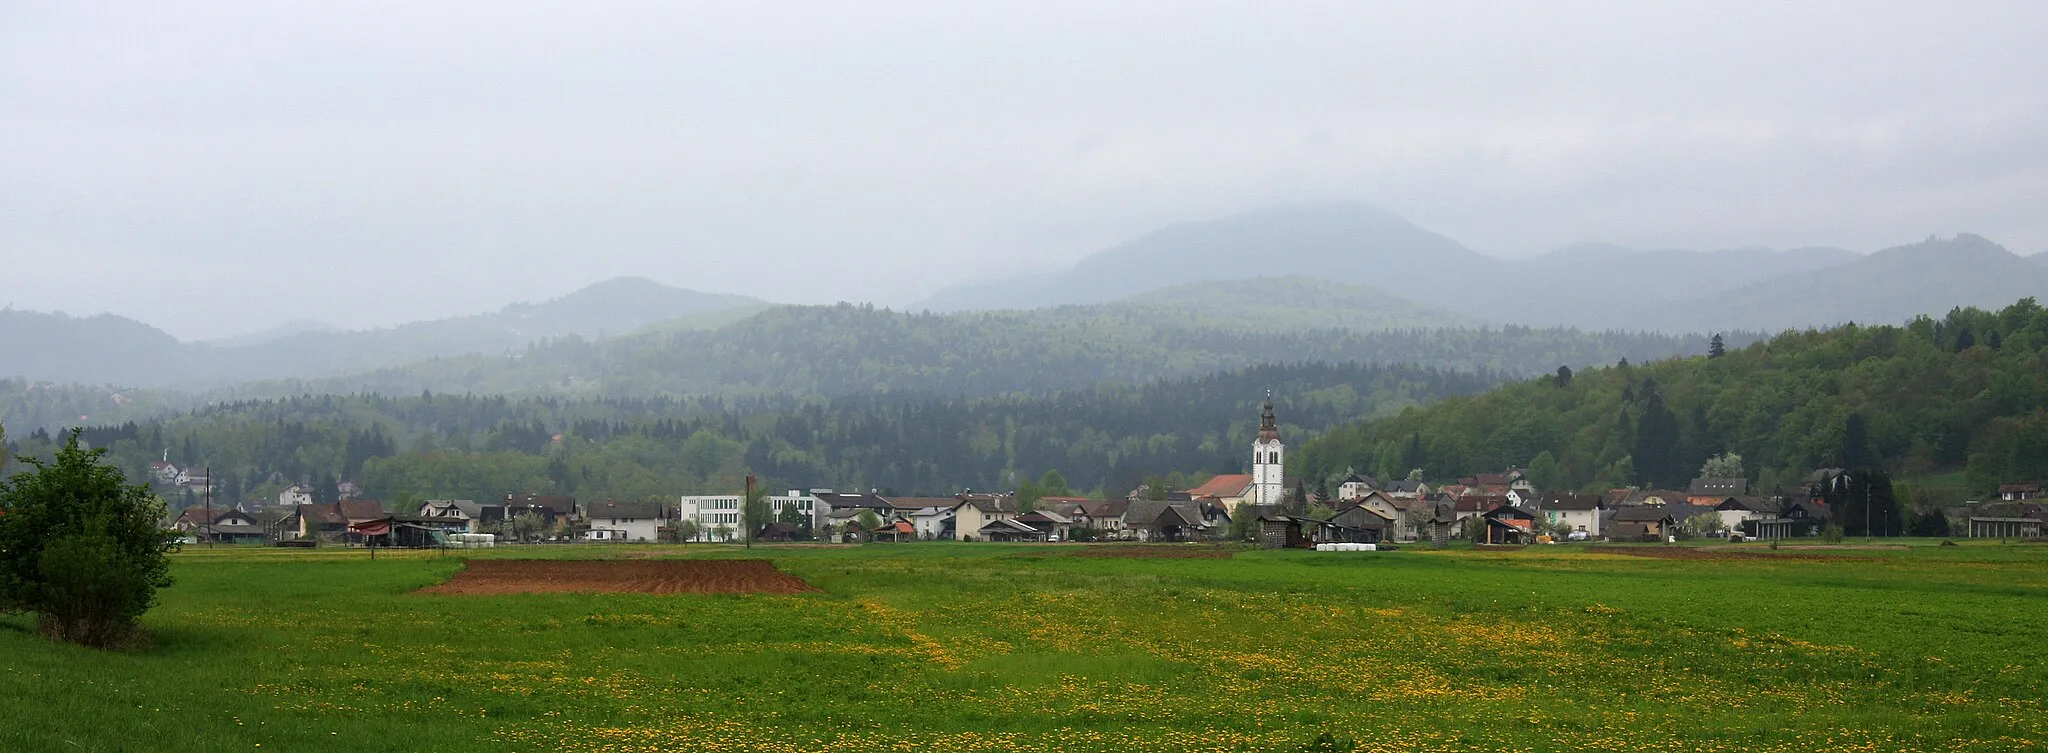 Photo showing: Ig, a town in Ig municipality, Slovenia